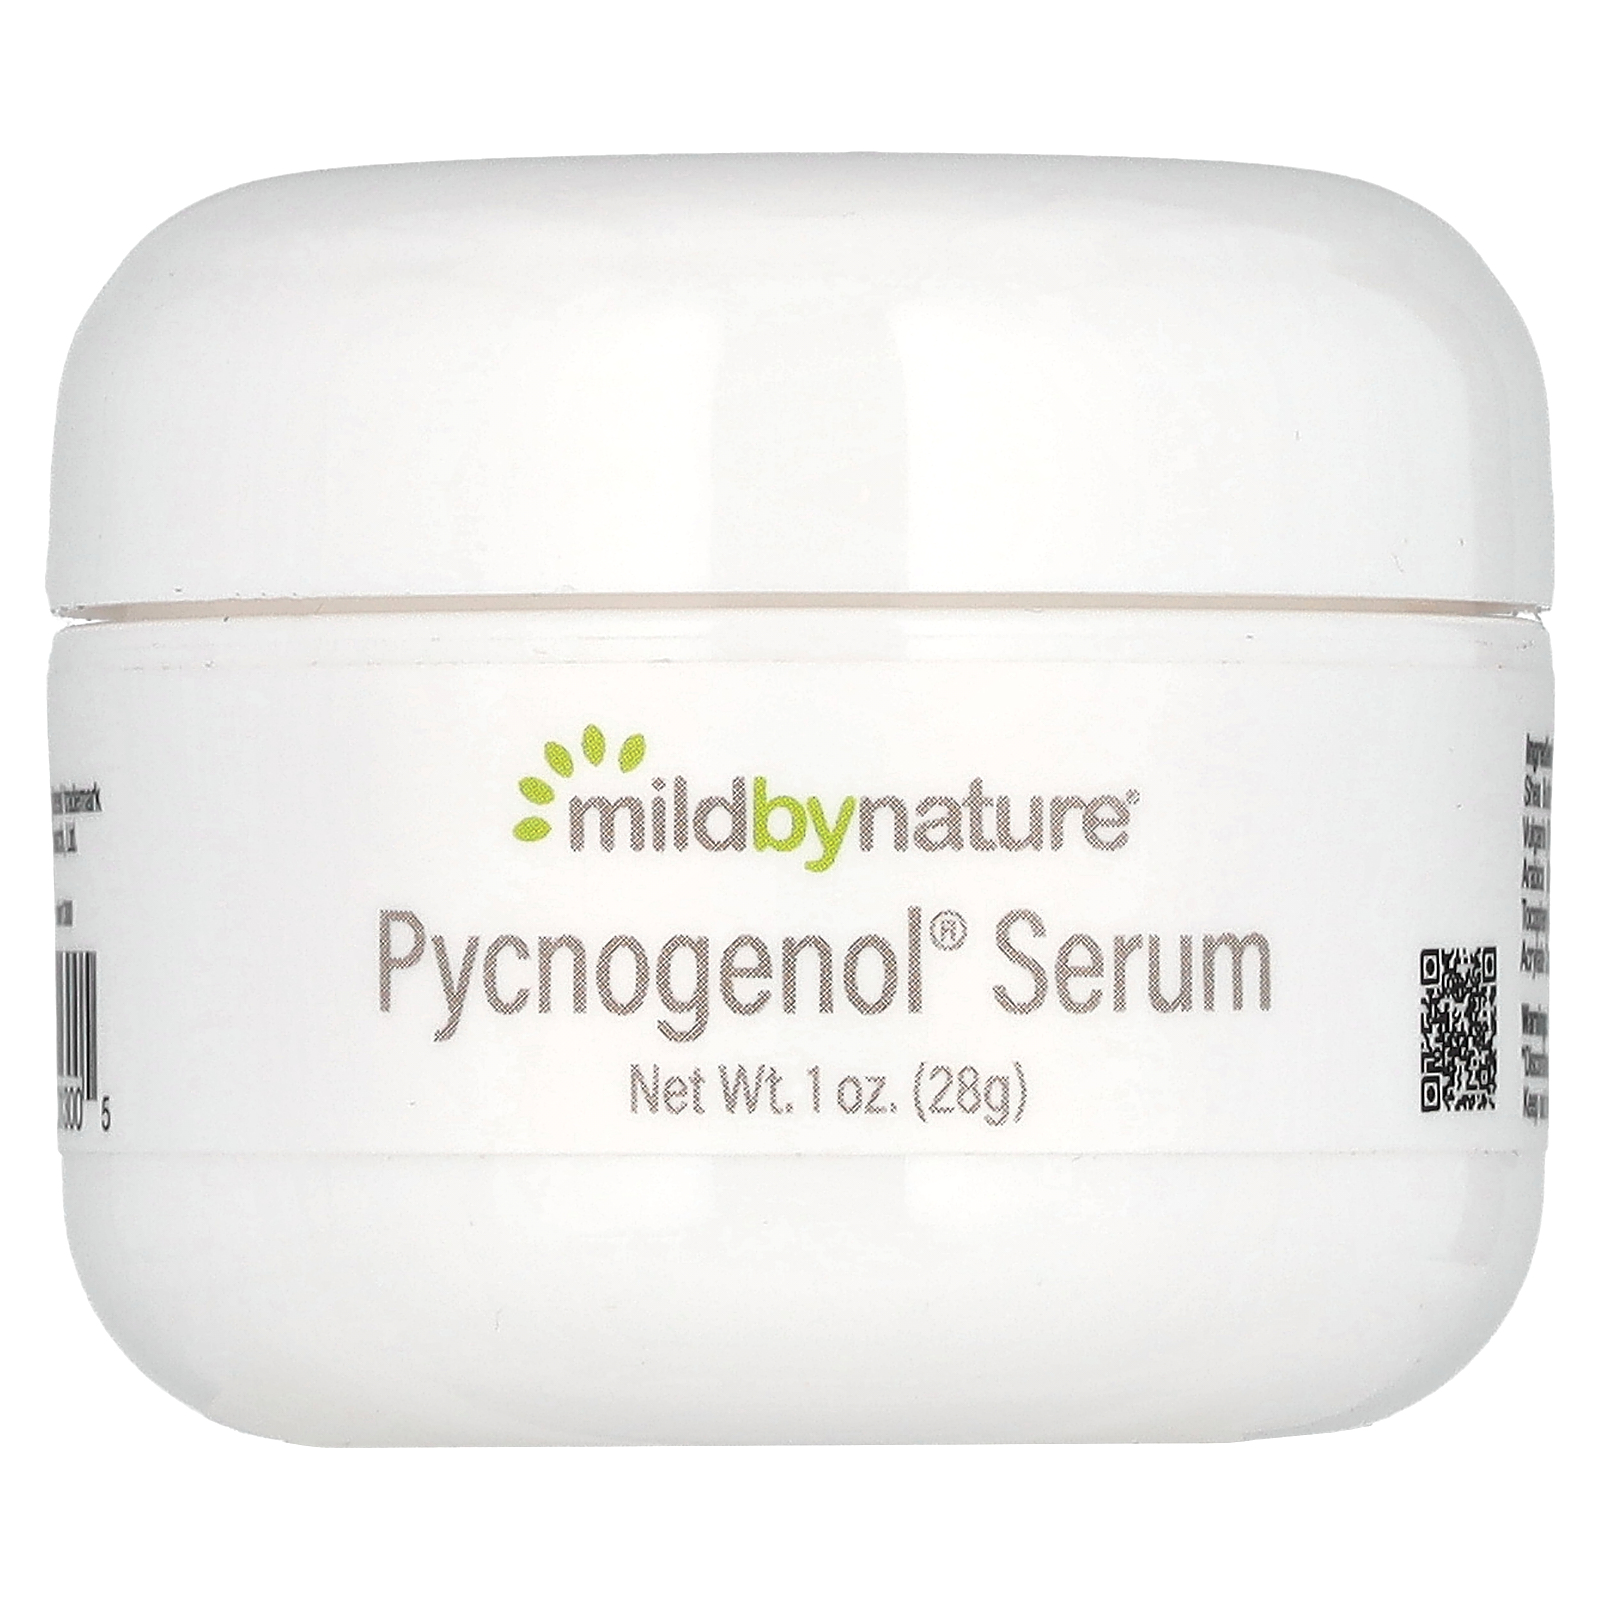 Mild By Nature Pycnogenol Serum (Cream), Soothing and Anti-Aging, 1 oz (28 g) - image 1 of 3